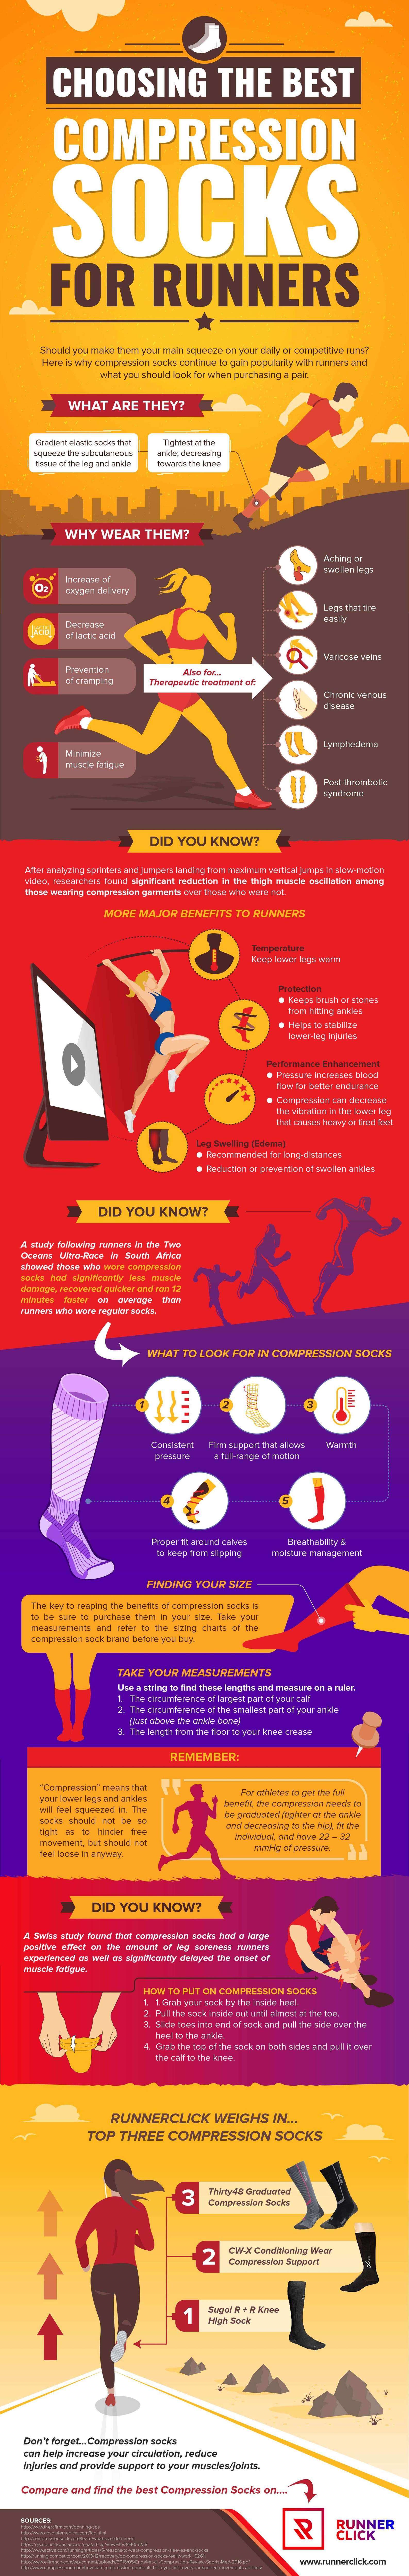 Choosing The Best Compression Socks For Runners Infographic